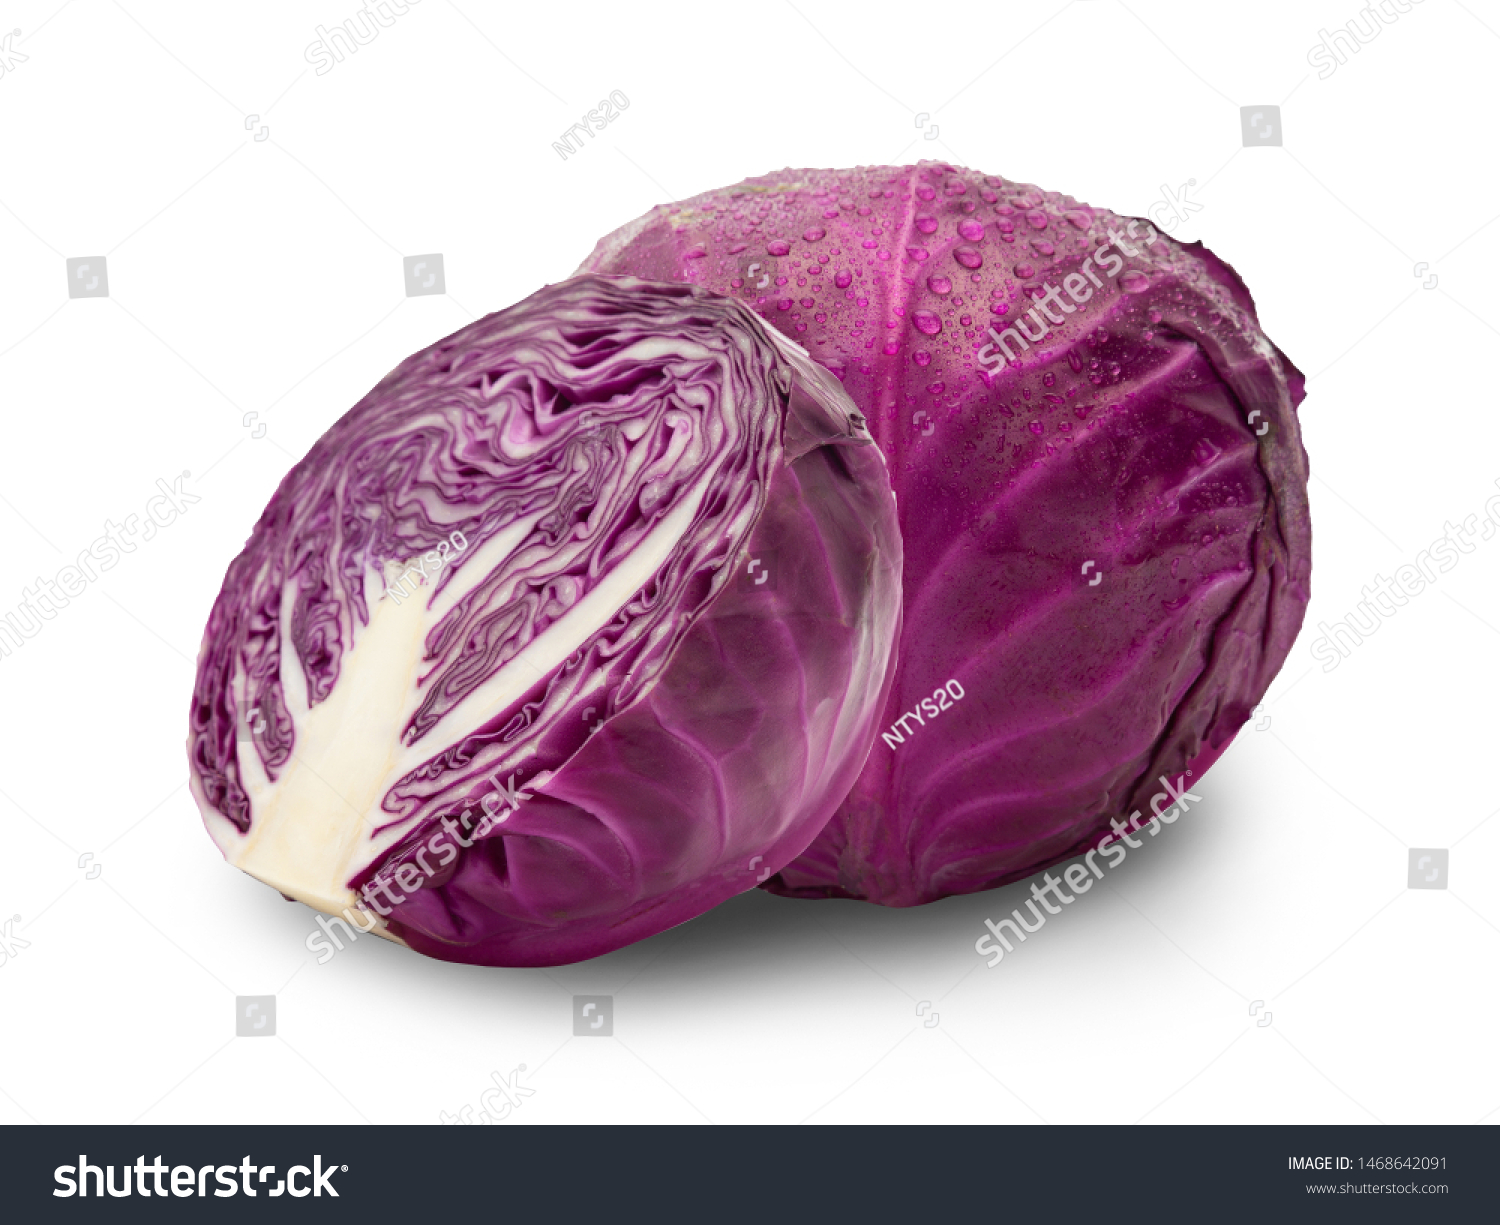 Whole Red Cabbage Half Isolated On Stock Photo Edit Now 1468642091,Thai Food Meme